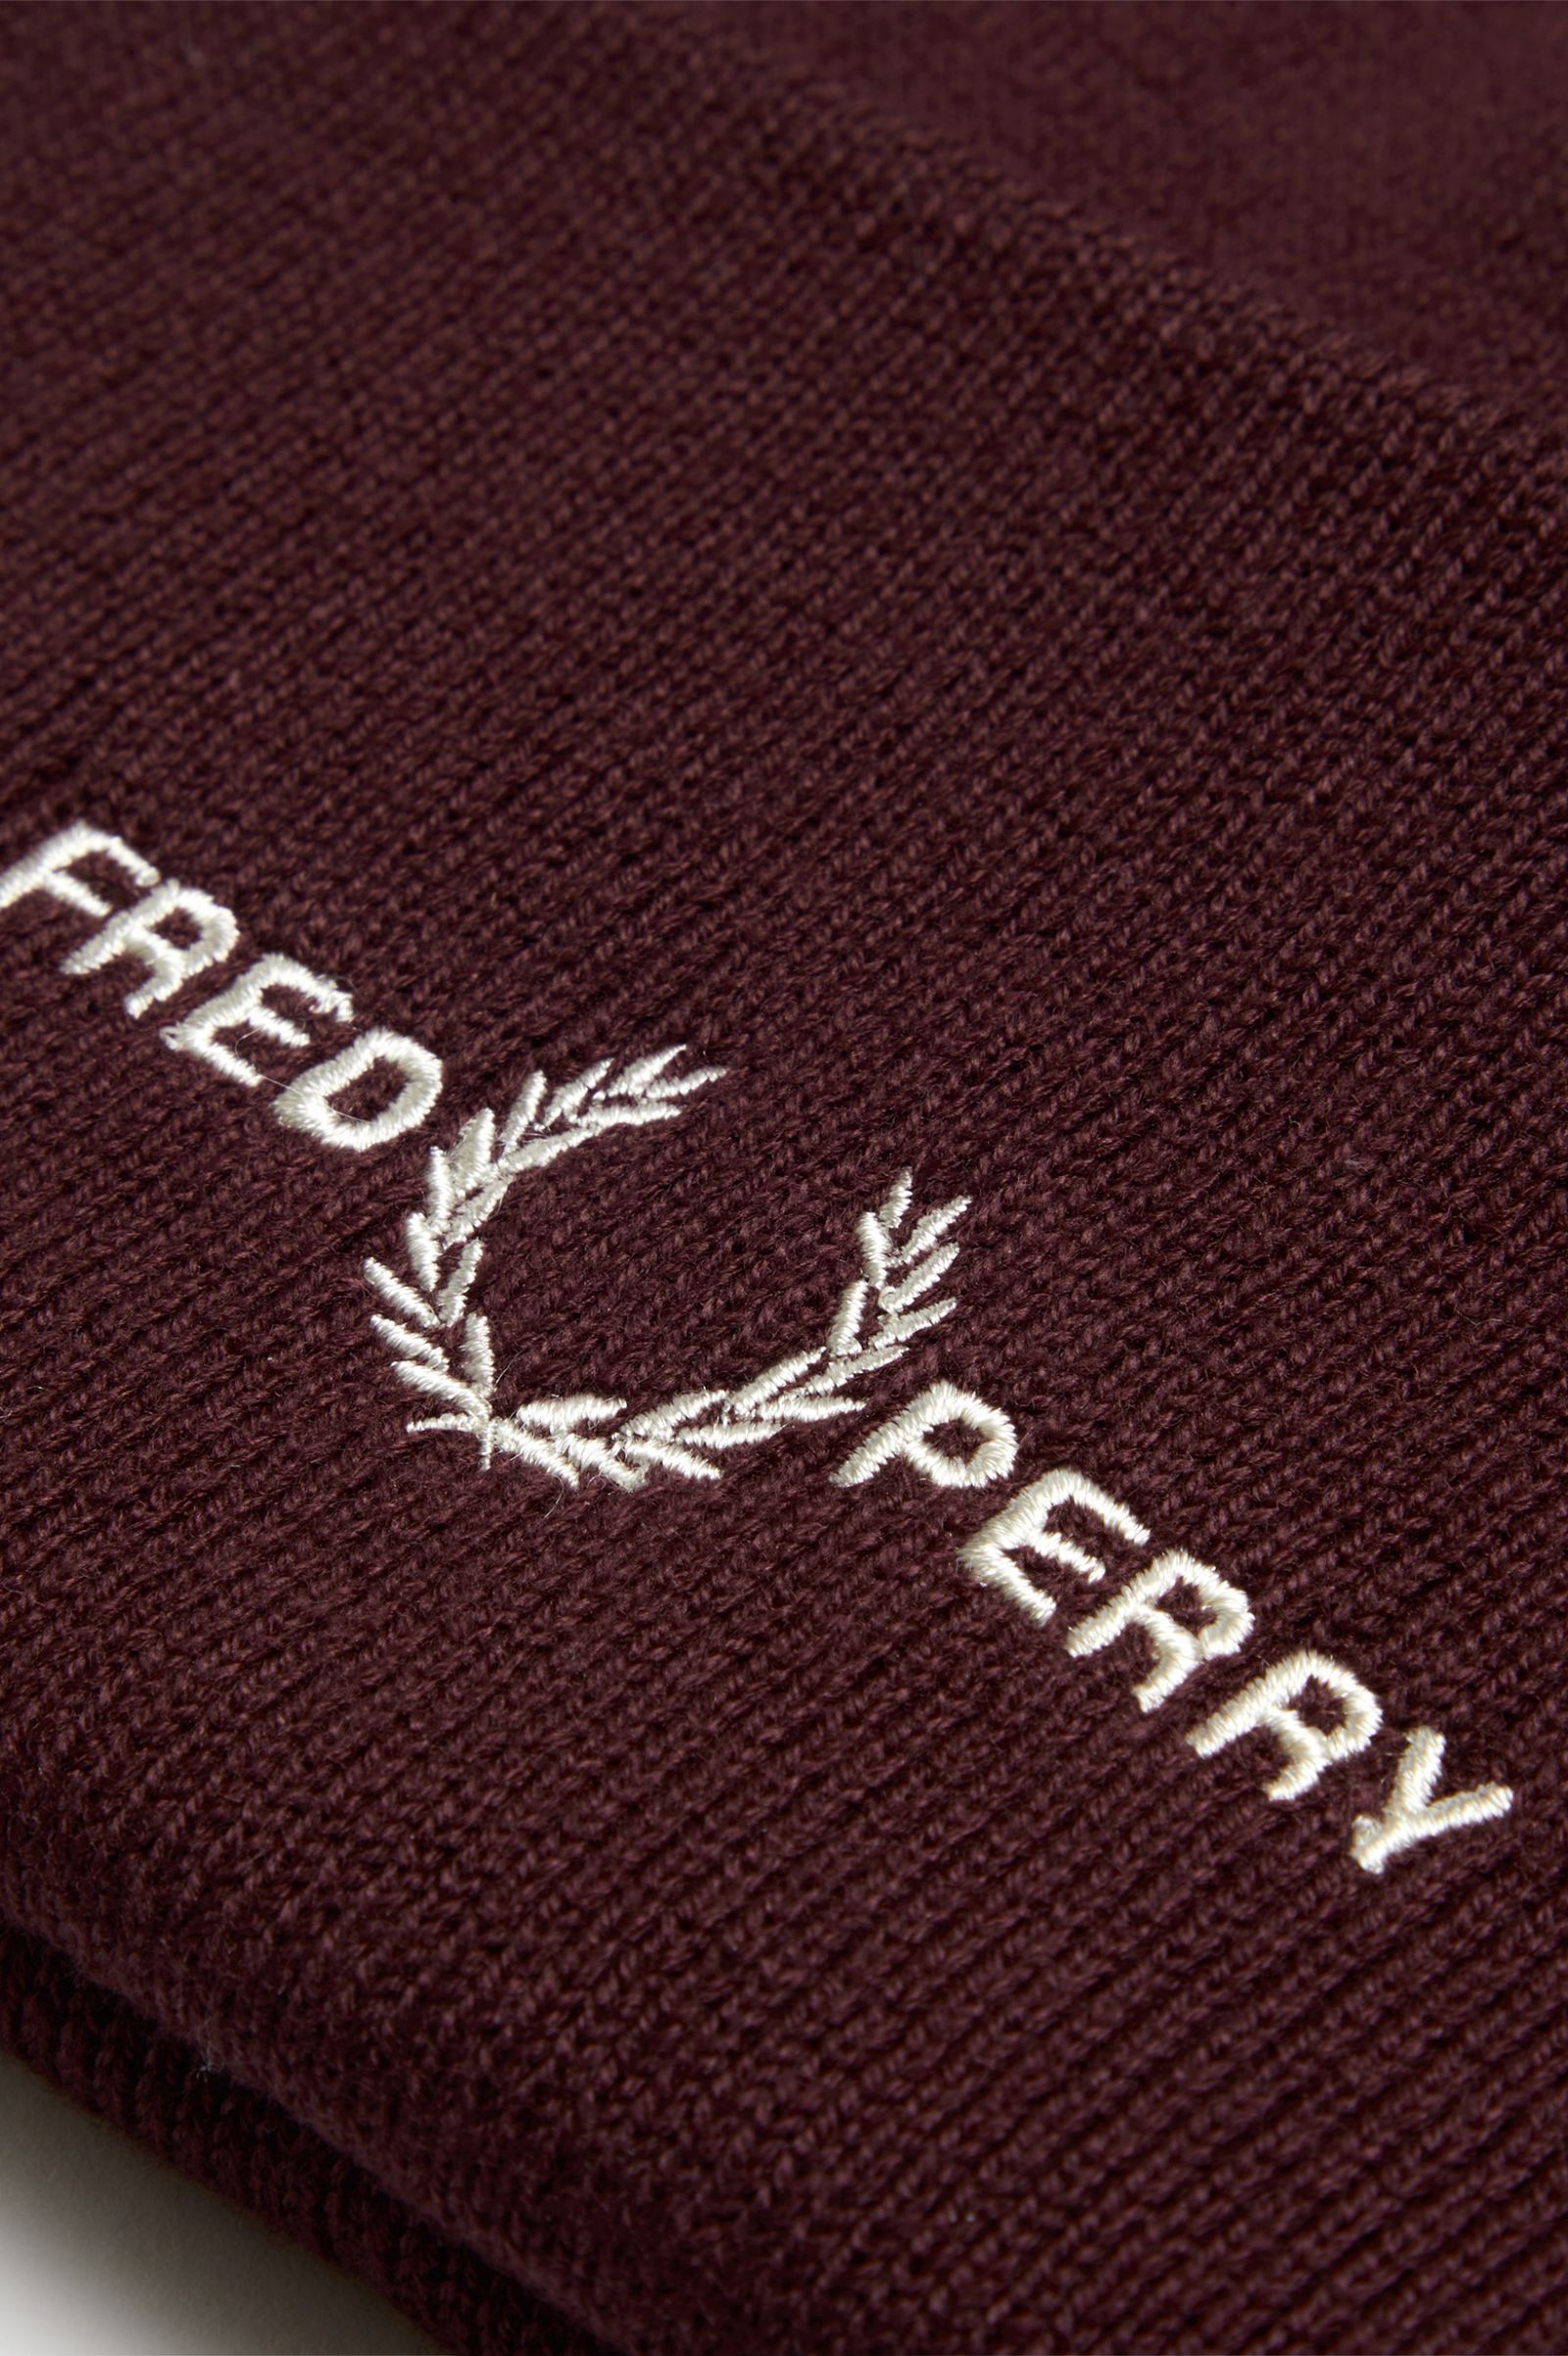 Fred Perry - GRAPHIC BEANIE - Oxblood